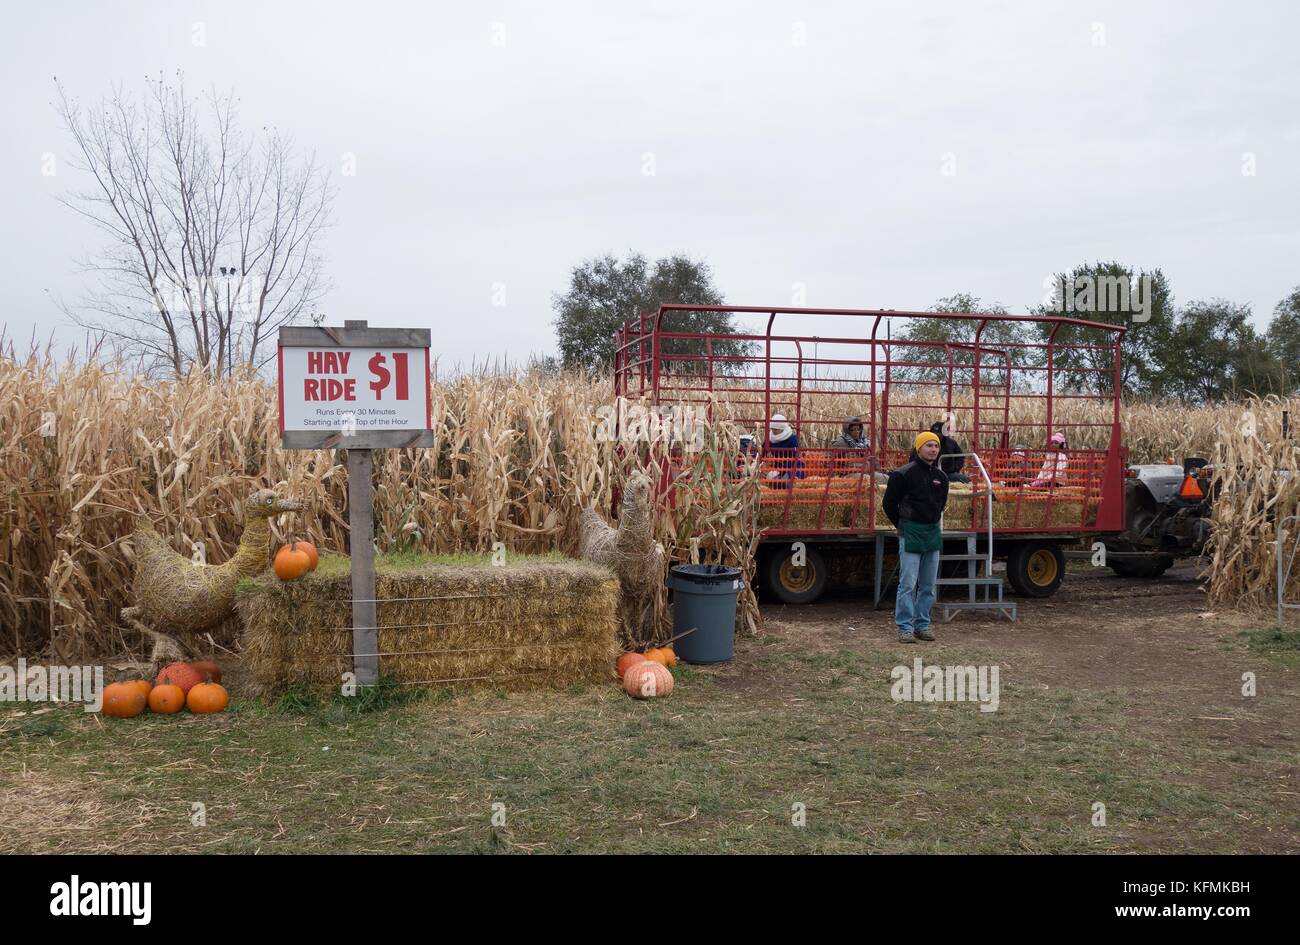 People preparing to go on a hay ride at Sever's Fall Festival in Shakopee, Minnesota, USA. Stock Photo